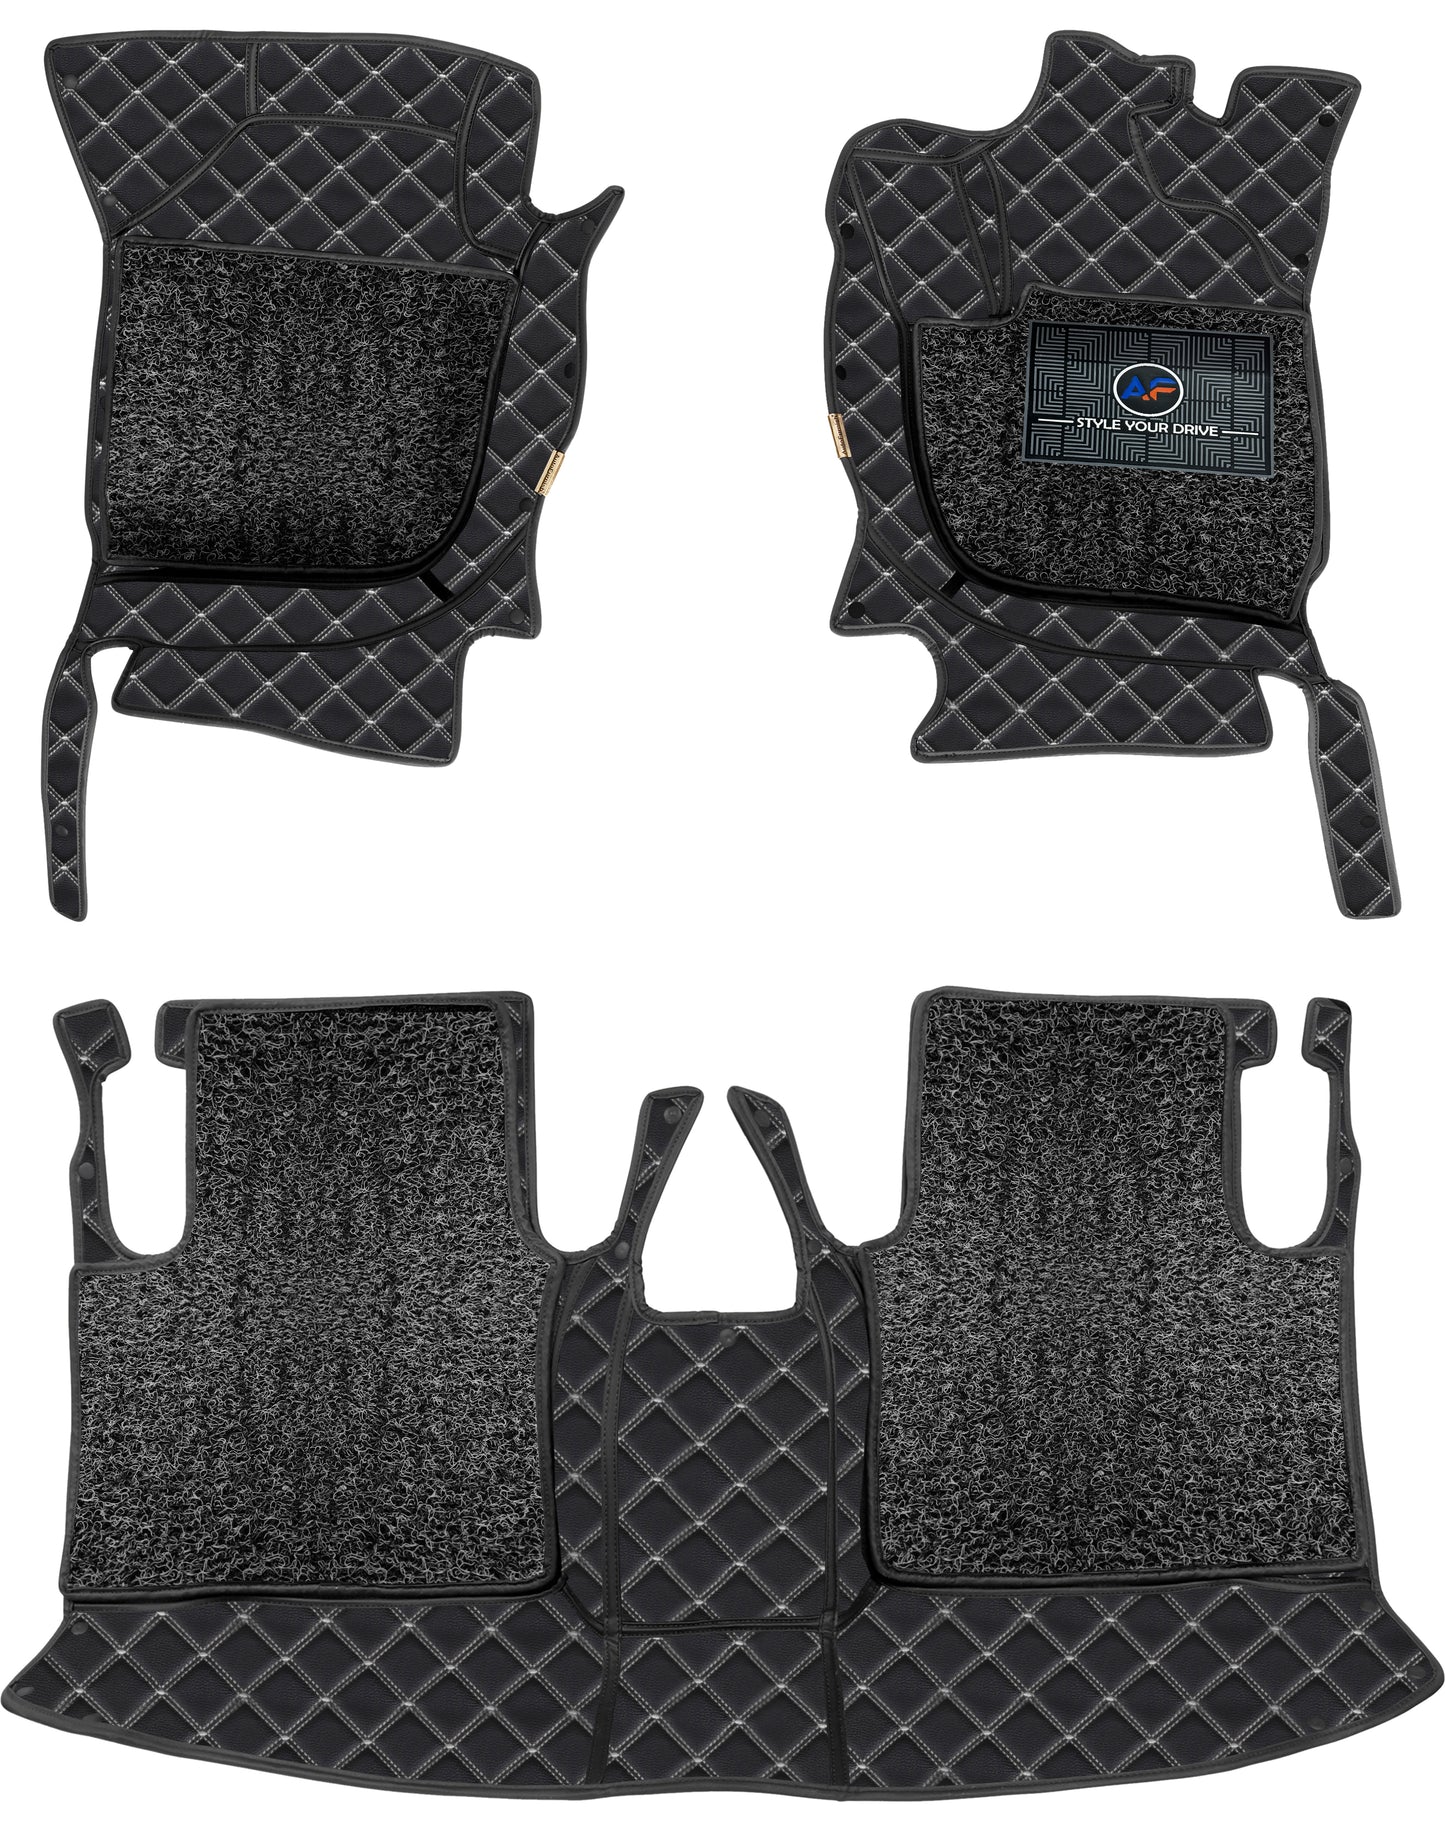 Volvo S90-(2017-19)-7D Luxury Car Mat, All Weather Proof, Anti-Skid, 100% Waterproof & Odorless with Unique Diamond Fish Design (24mm Luxury PU Leather, 2 Rows)